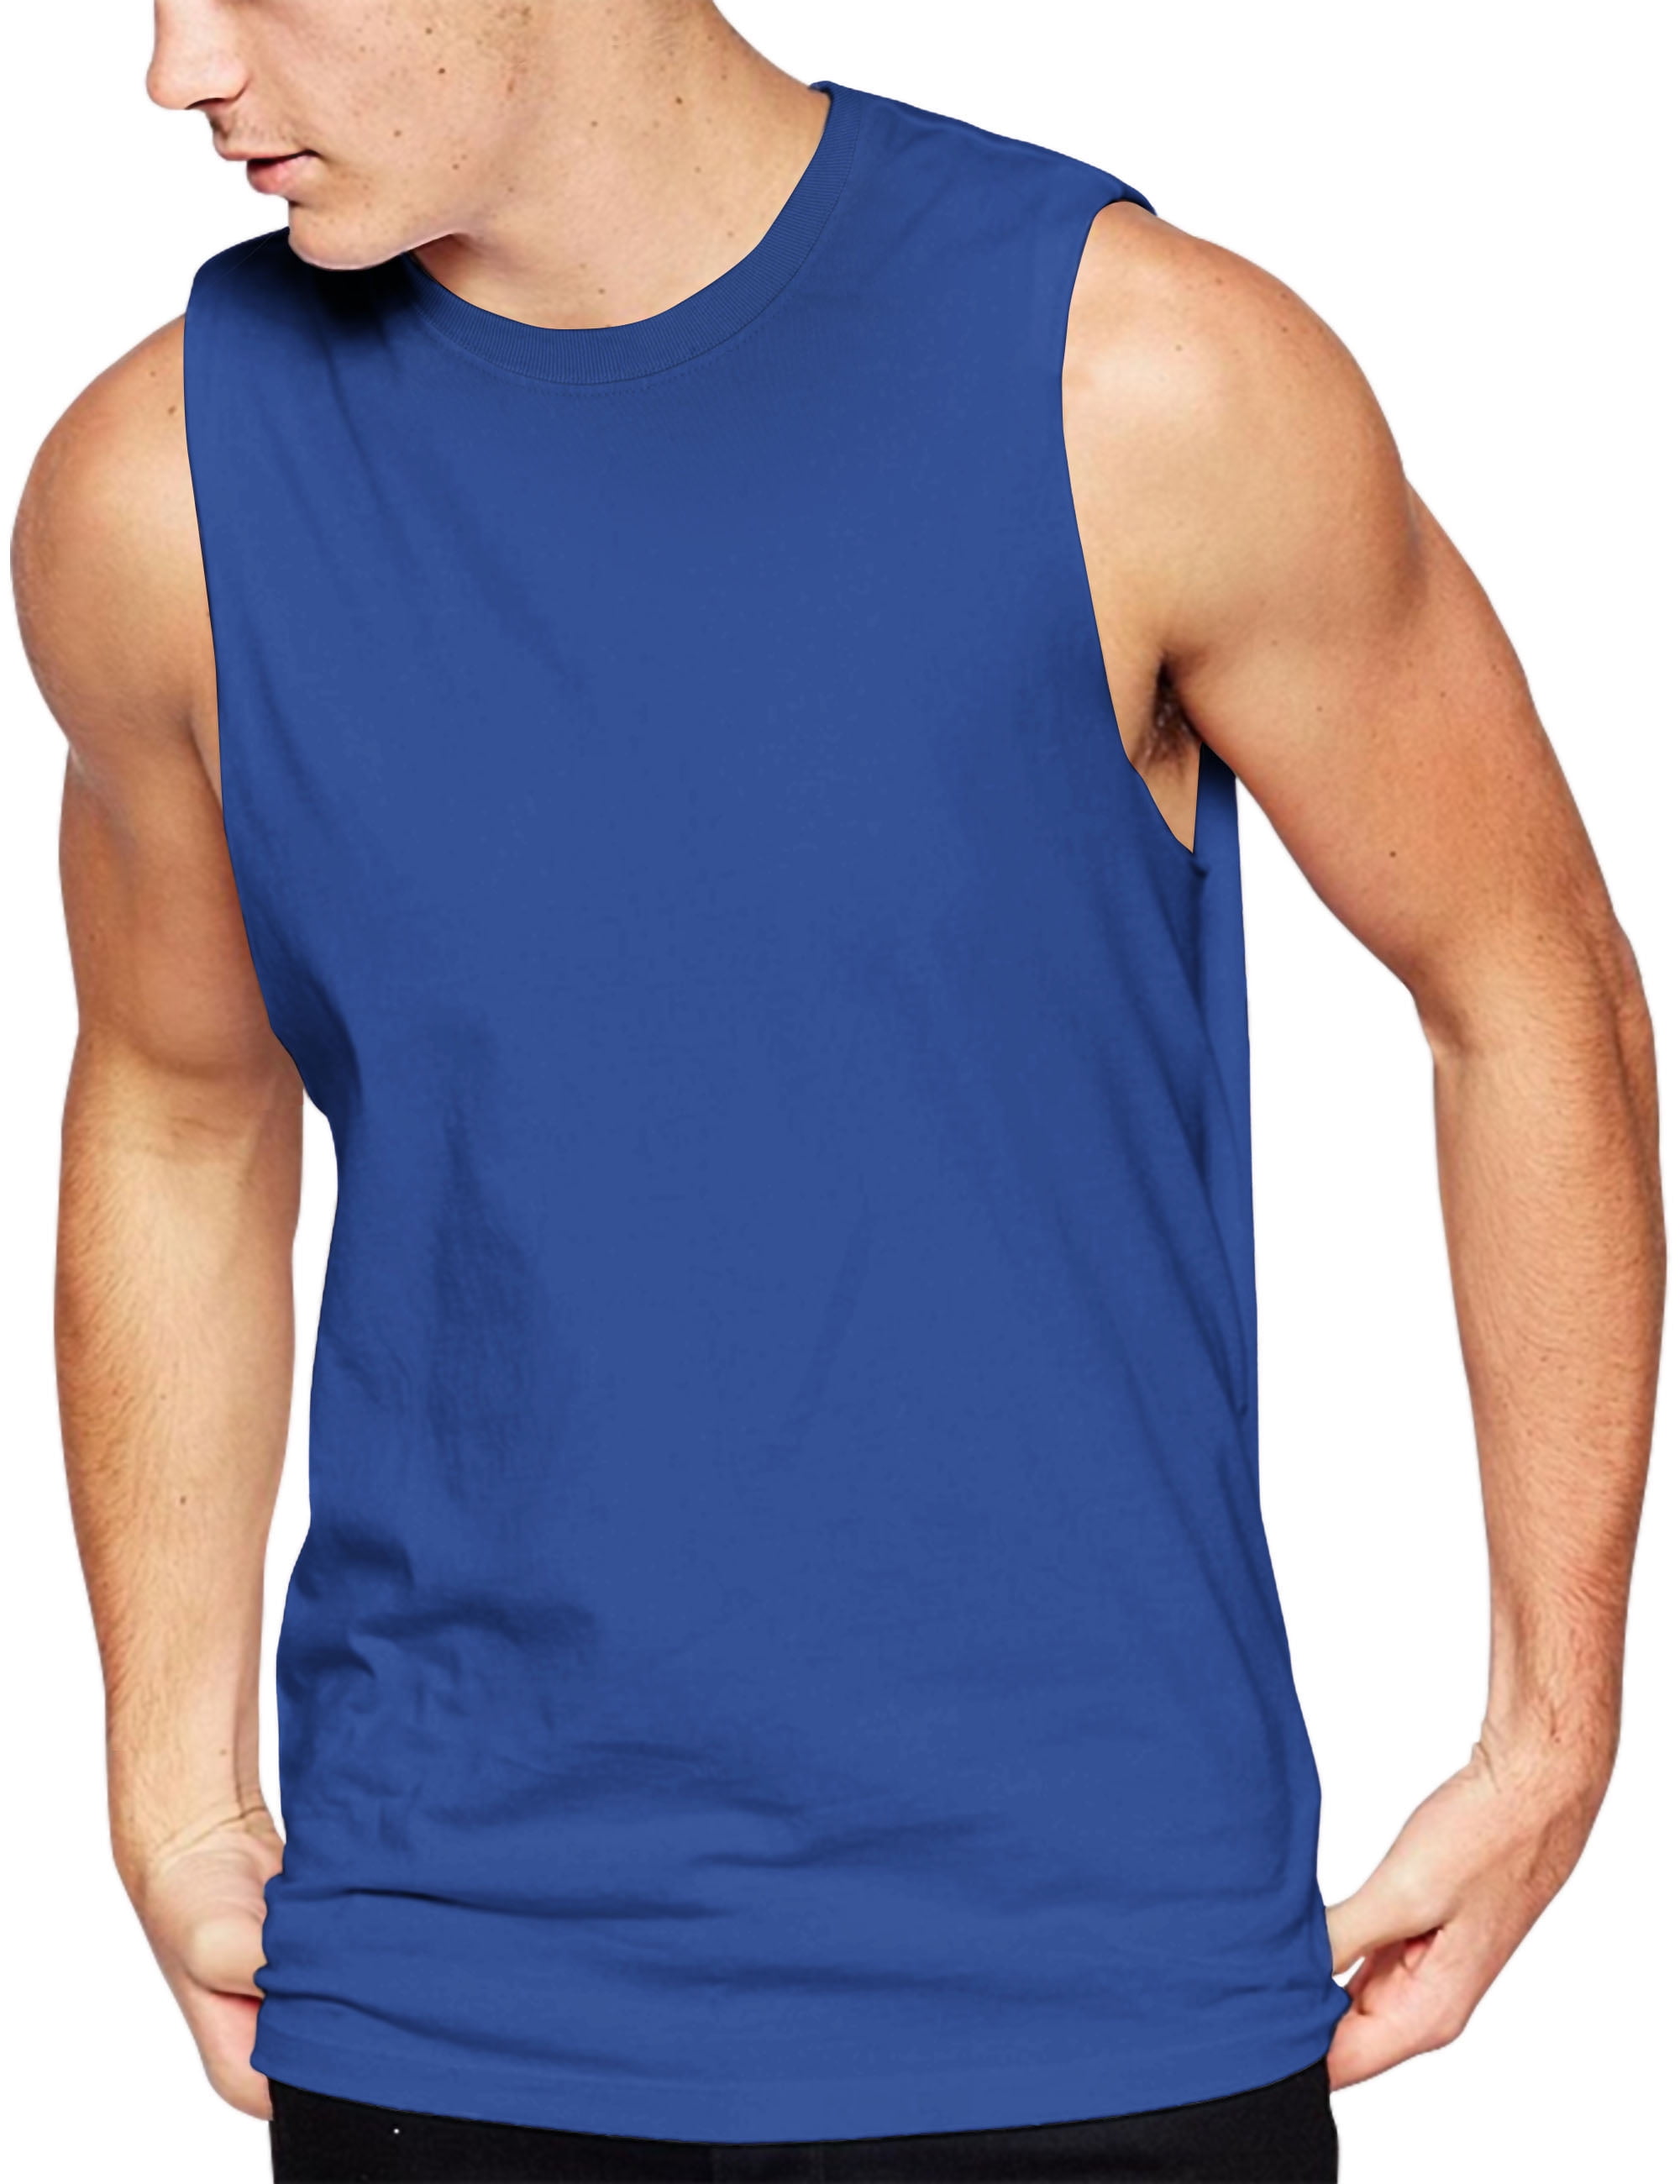 Under Armour Mens Sportstyle Logo Tank Top Navy Blue Sports Gym Breathable 